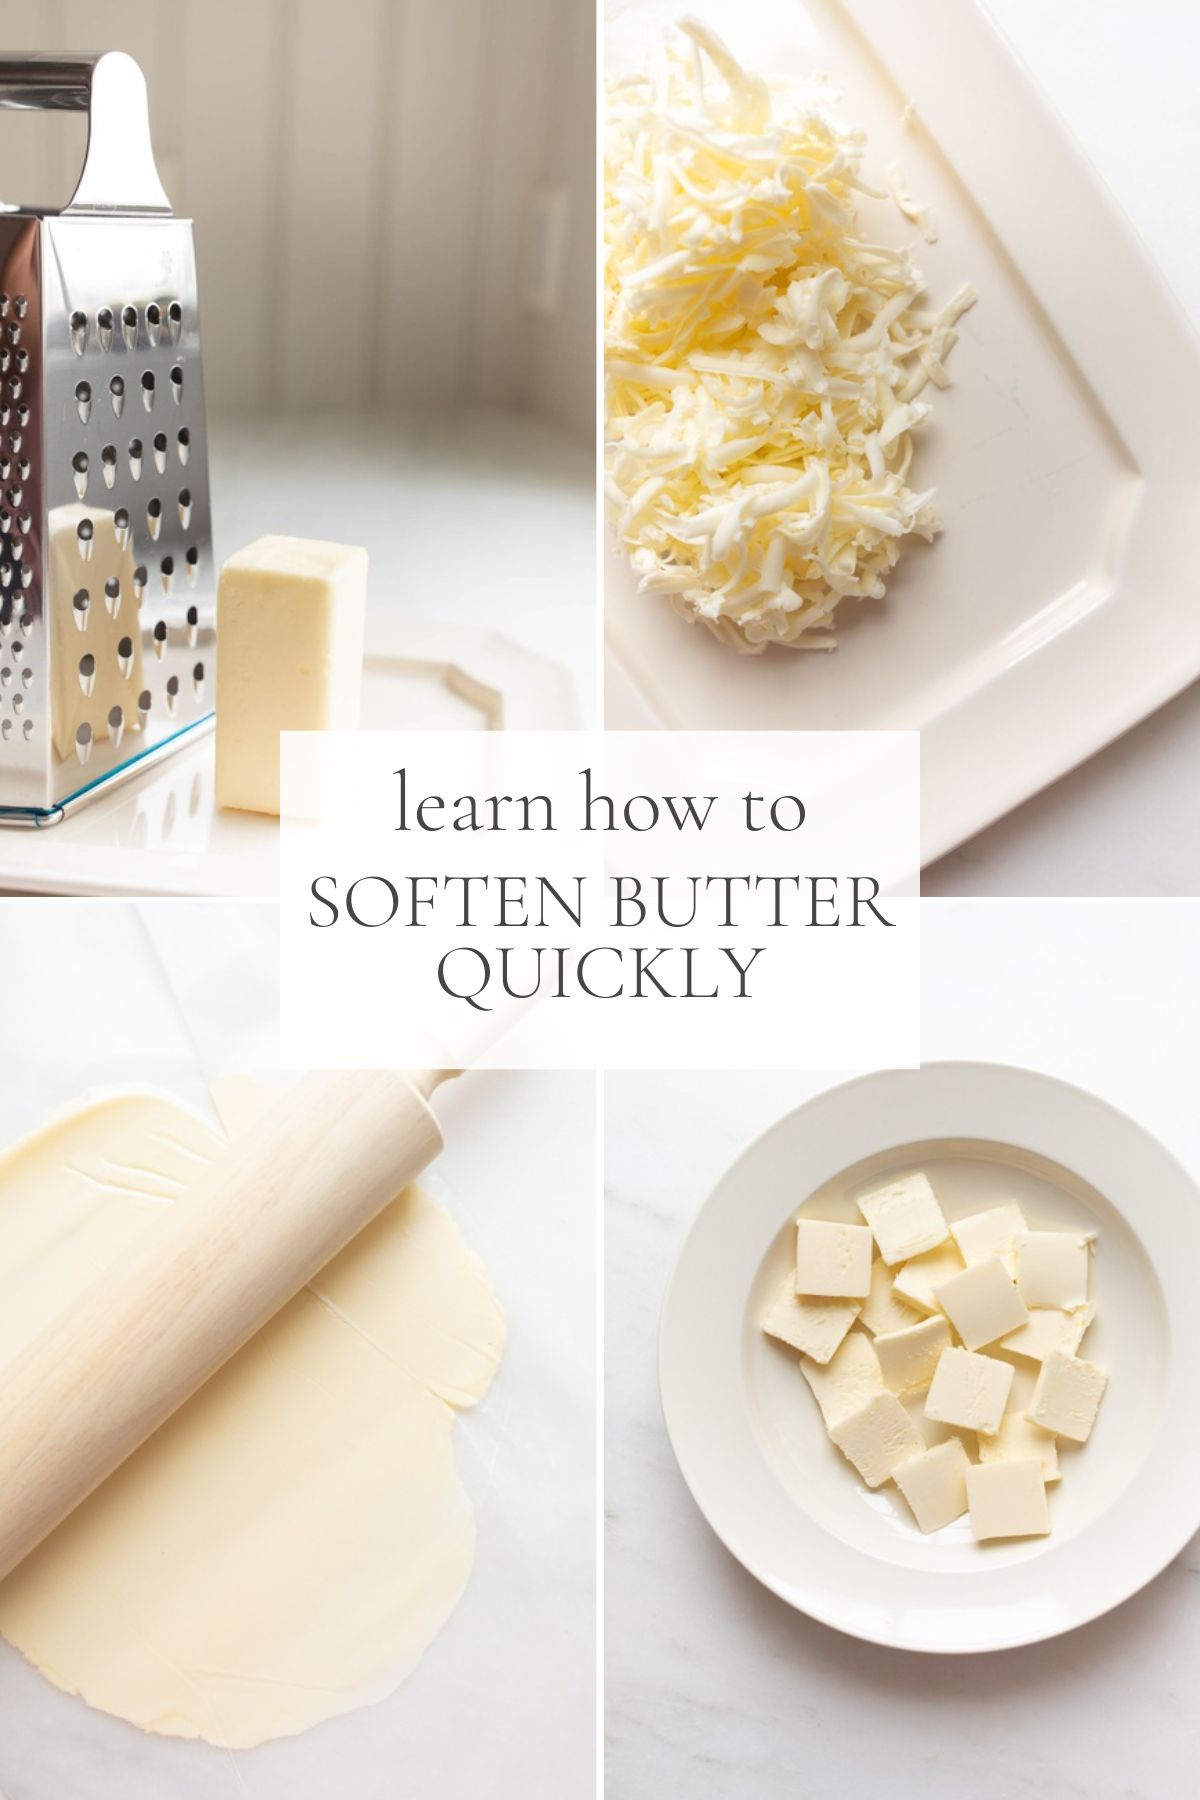 “Learn How to Quickly Soften Butter with These Handy Tips”